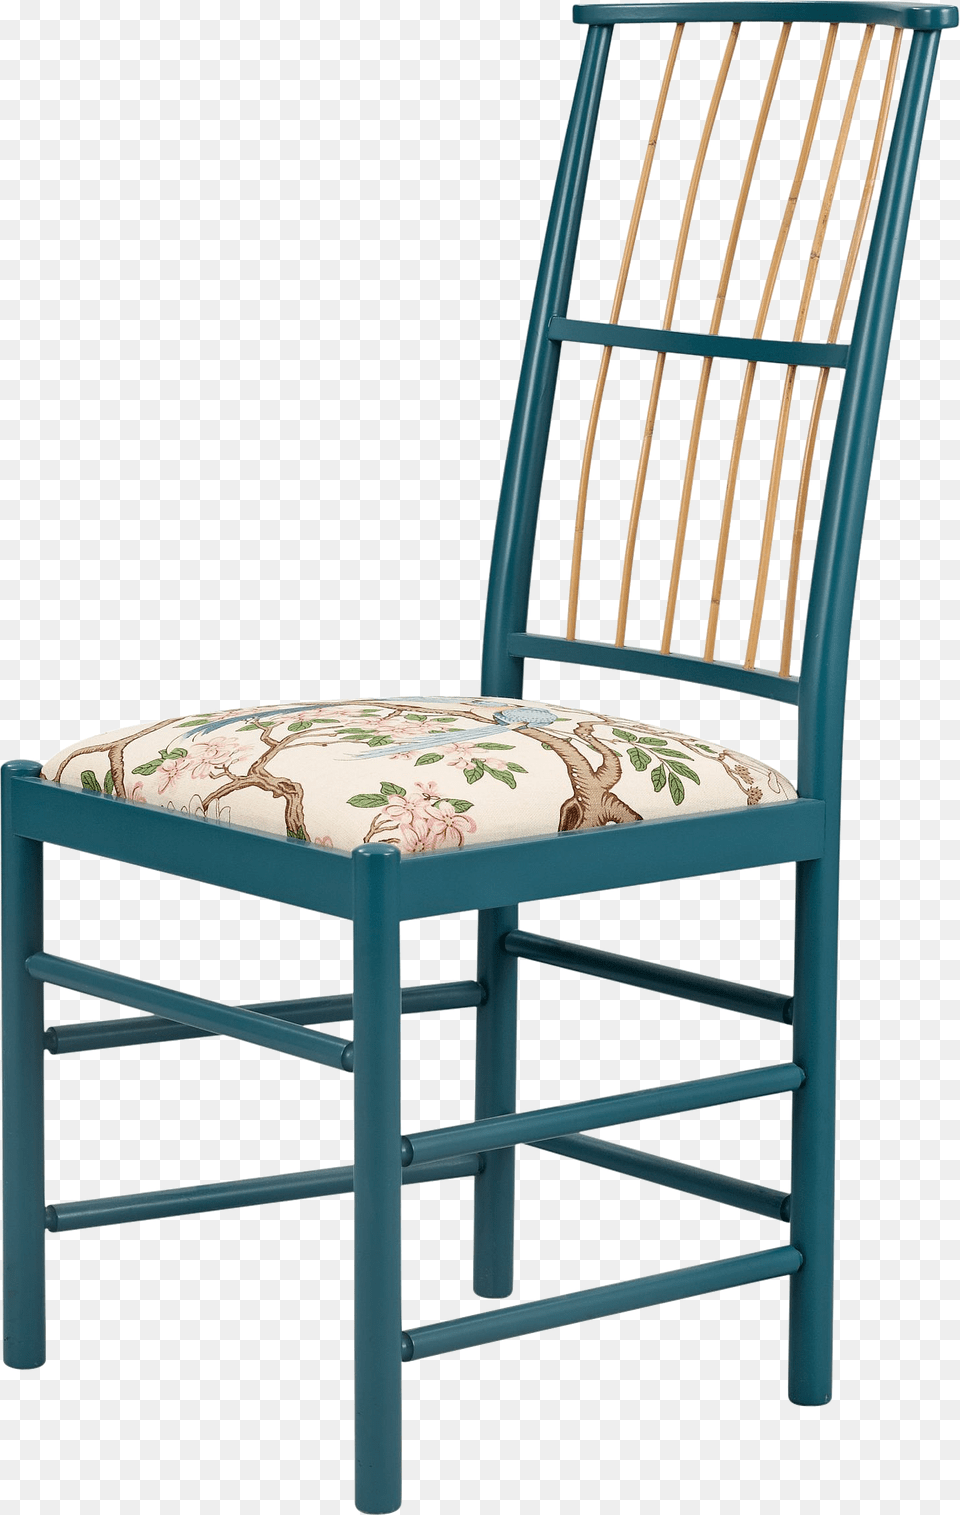 Image, Furniture, Crib, Infant Bed, Chair Free Png Download